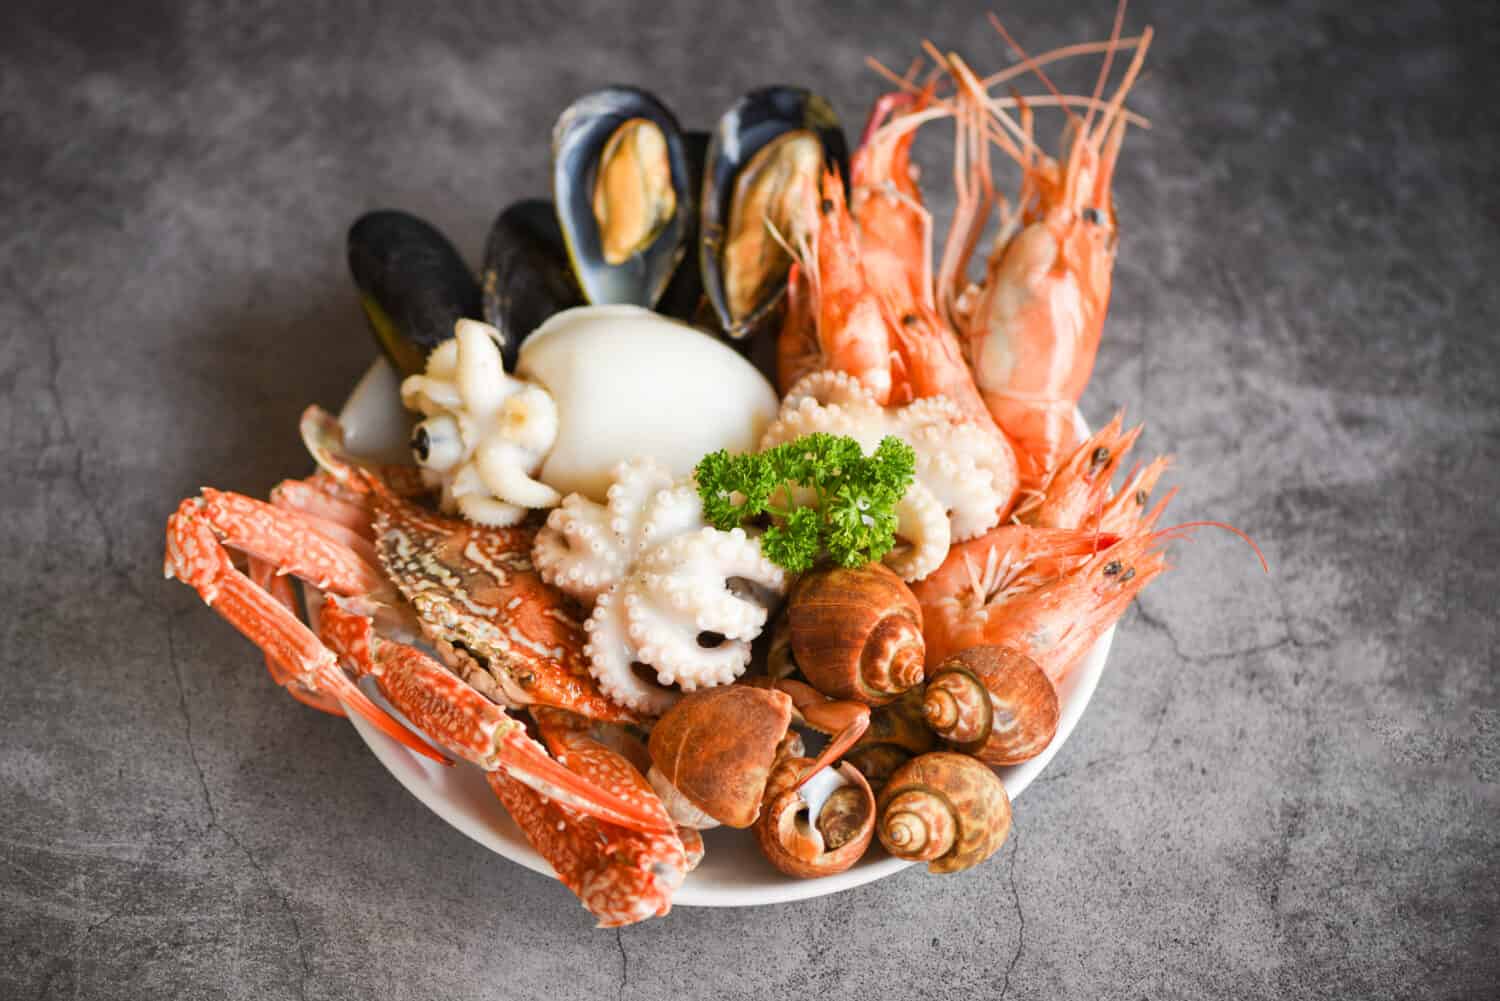 <p><em>10 Hayne Street, Charleston, SC 29401</em></p>    <p>Another great establishment to try is the Southern classic <a href="https://hanksseafoodrestaurant.com/">Hank's Seafood Restaurant</a>. Styled after the fish houses of the 1940s, Hank's is heralded by Chef Tim Richardson, a South Carolina native. Mentored by Hank’s Seafood Restaurant founder Chef Frank McMahon, Chef Richardson enhances the history of the restaurant with fresh new ideas. <a href="https://hanksseafoodrestaurant.com/menu/">Enjoy</a> their raw bar with items like ceviche, tuna tartare, oysters on the half shell, and peel-n-eat shrimp.</p>    <p>There are seafood platters, local clams, and oyster stew. Try their fried oysters with hot sauce, smoked blue cheese, and pickled vegetables. Their classic dishes include pan-seared sea scallops, beef tenderloin, grilled swordfish, and roasted salmon. Pair these options with collard greens, fried green tomatoes, and other tasty sides. And finally, pick from pecan pie, chilled crème brûlée, key lime pie, and chocolate peanut butter parfait, among many other sweet desserts, courtesy of Hank's Seafood Restaurant.</p>